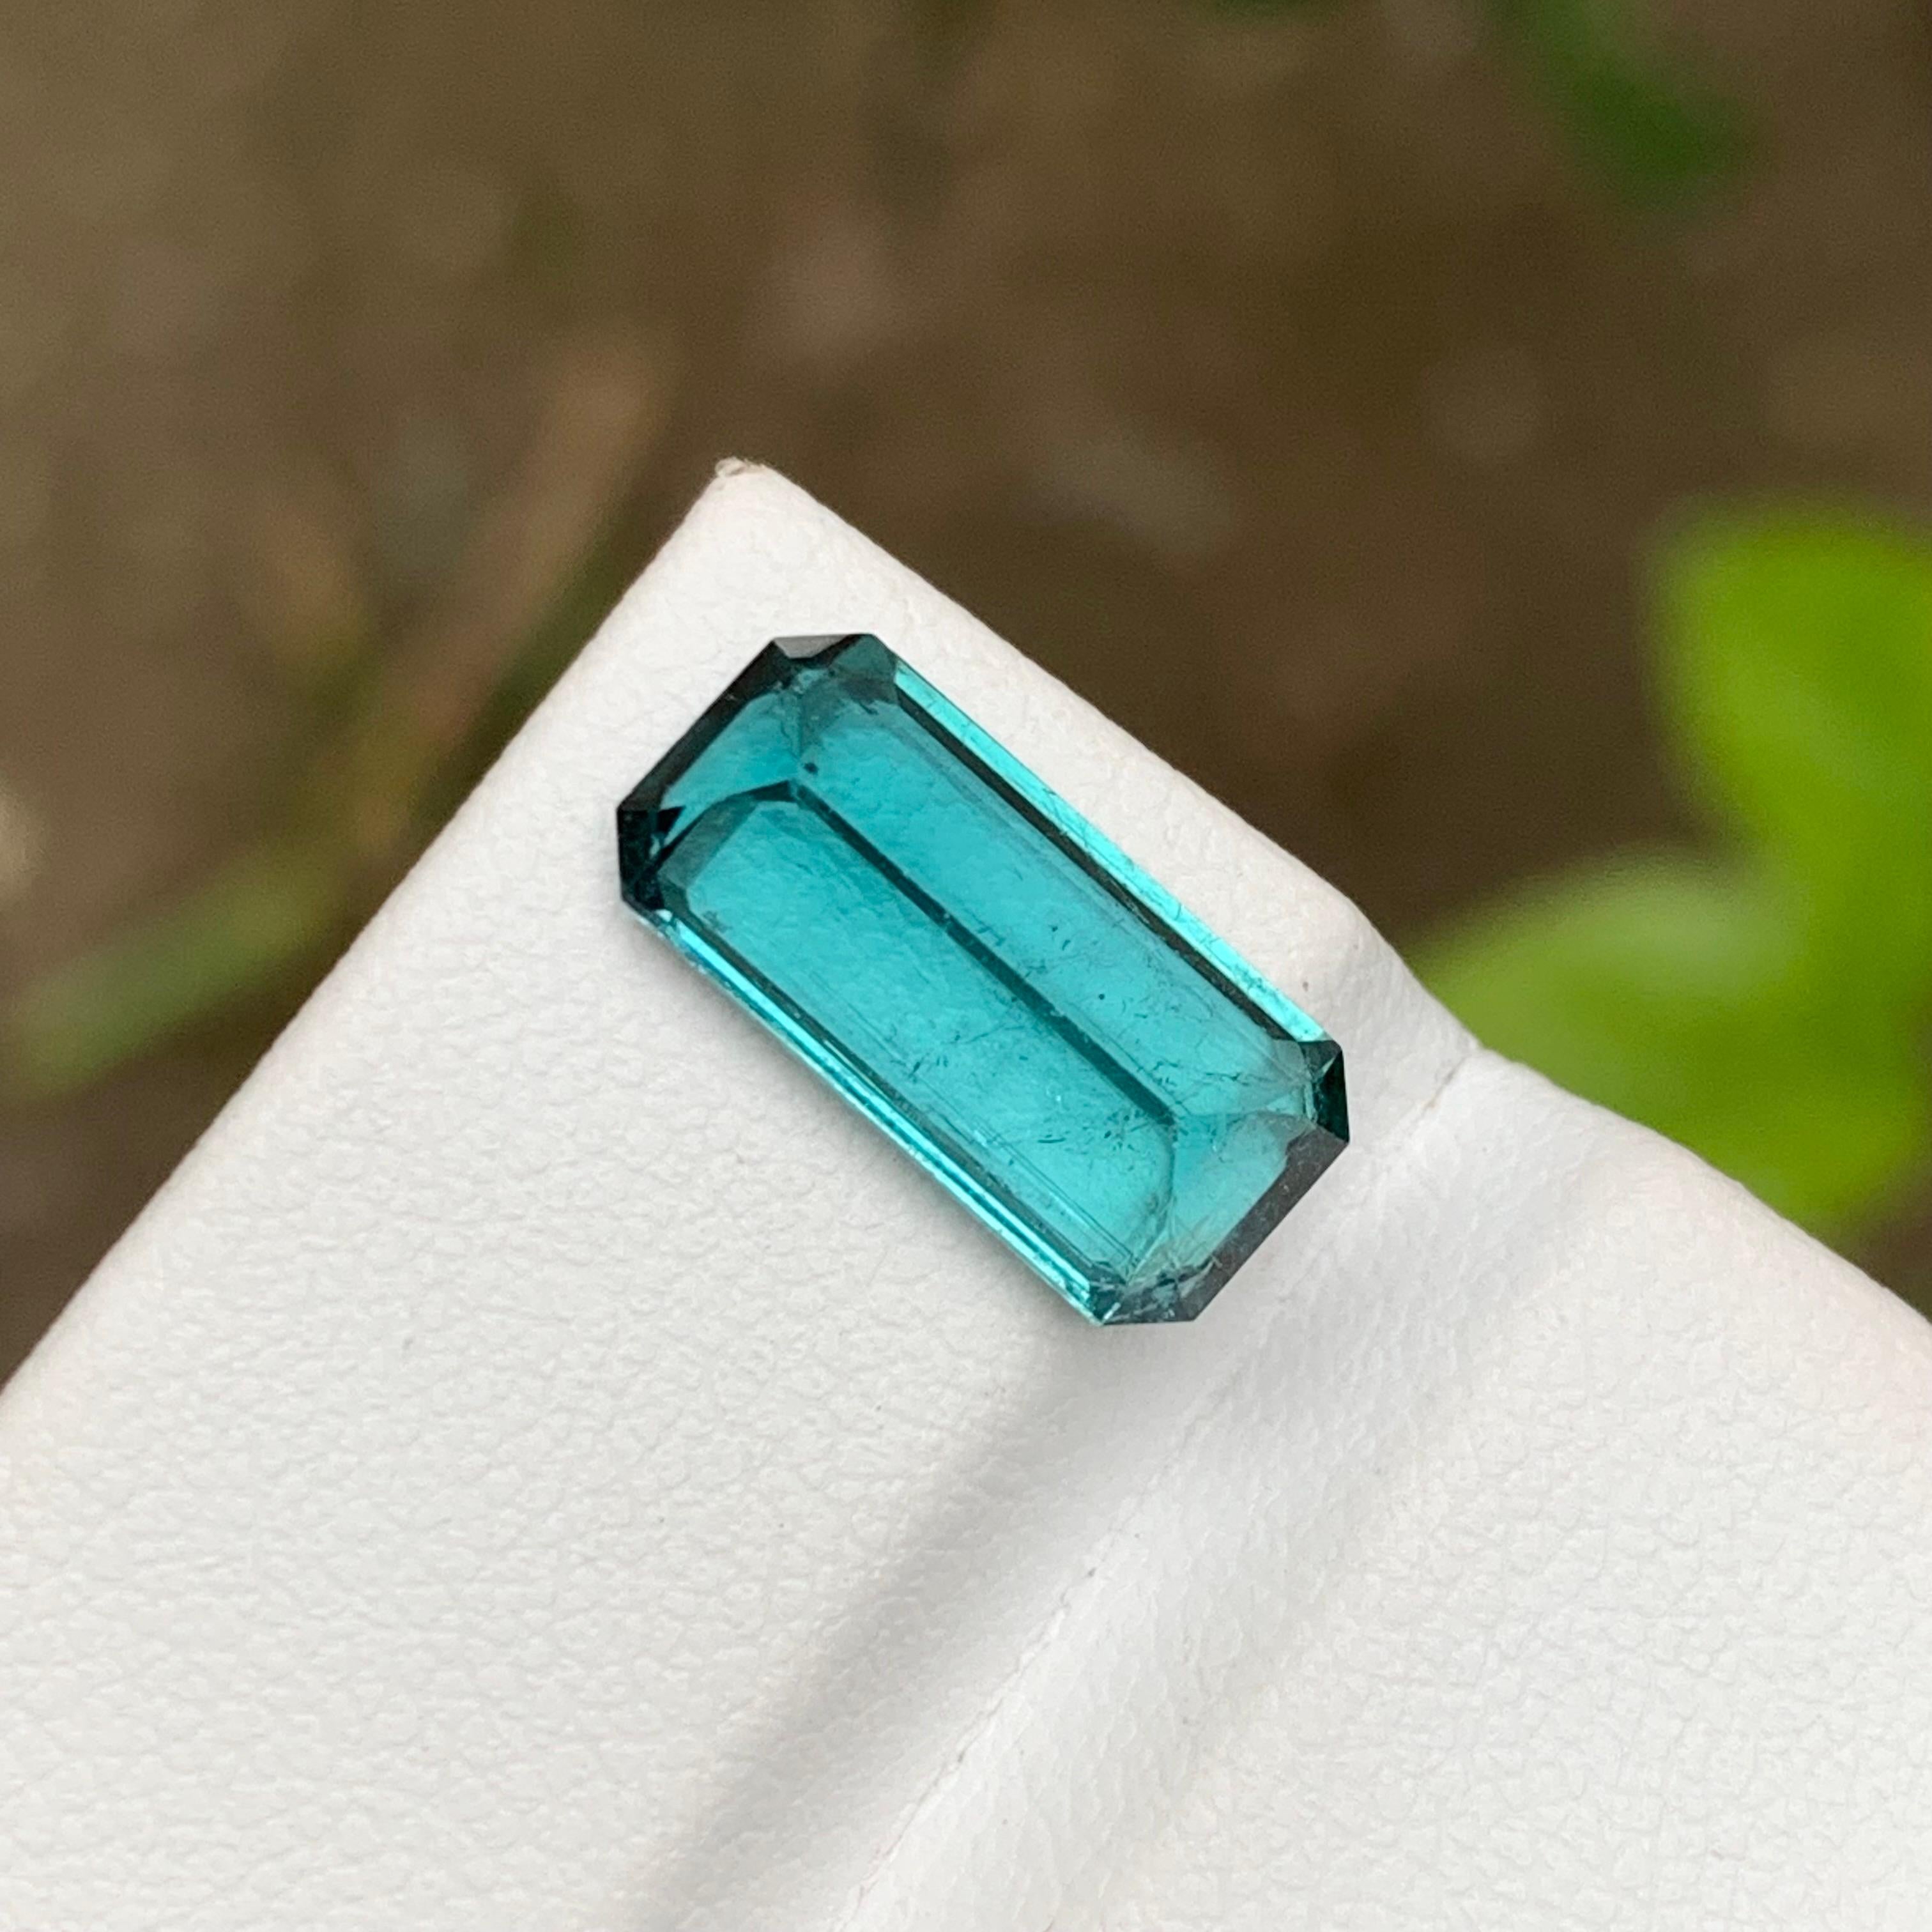 Women's or Men's Rare Neon Blue Natural Tourmaline Gemstone, 4 Ct Emerald Cut for Ring/Jewelry AF For Sale